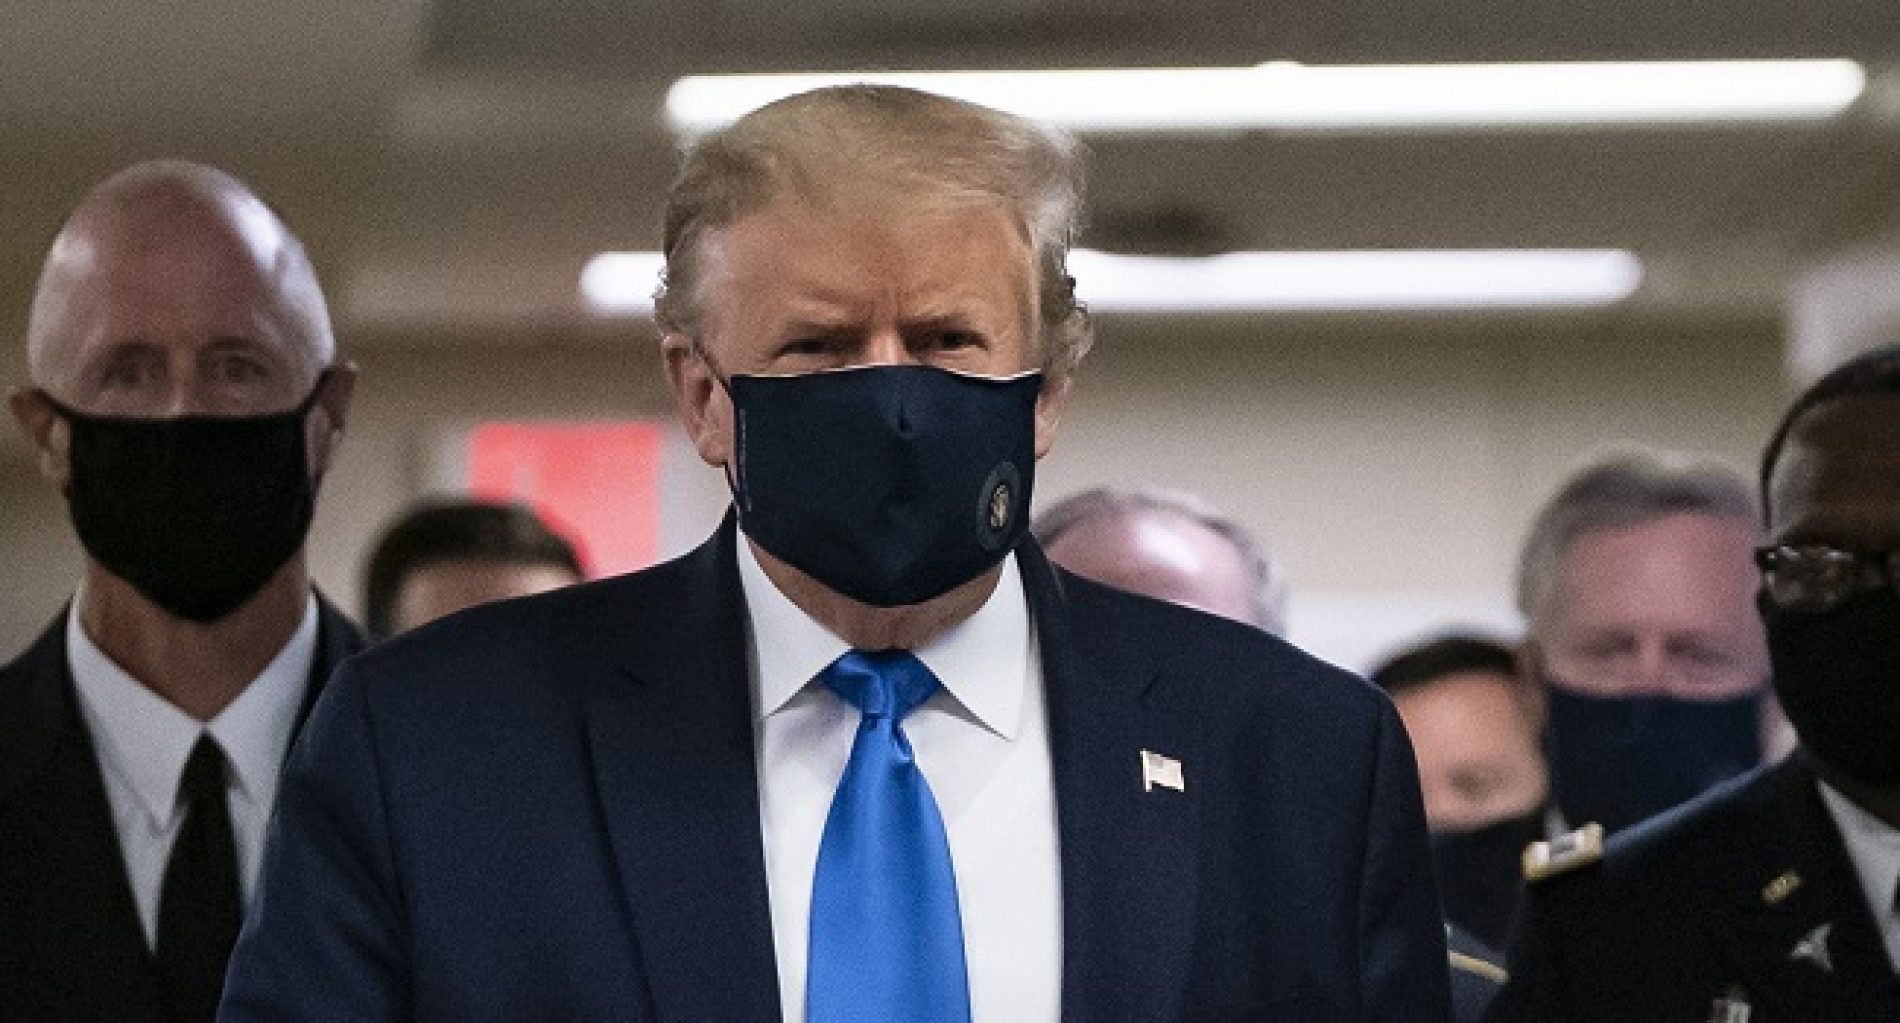 Trump Seen Wearing Facemask In Public For First Time